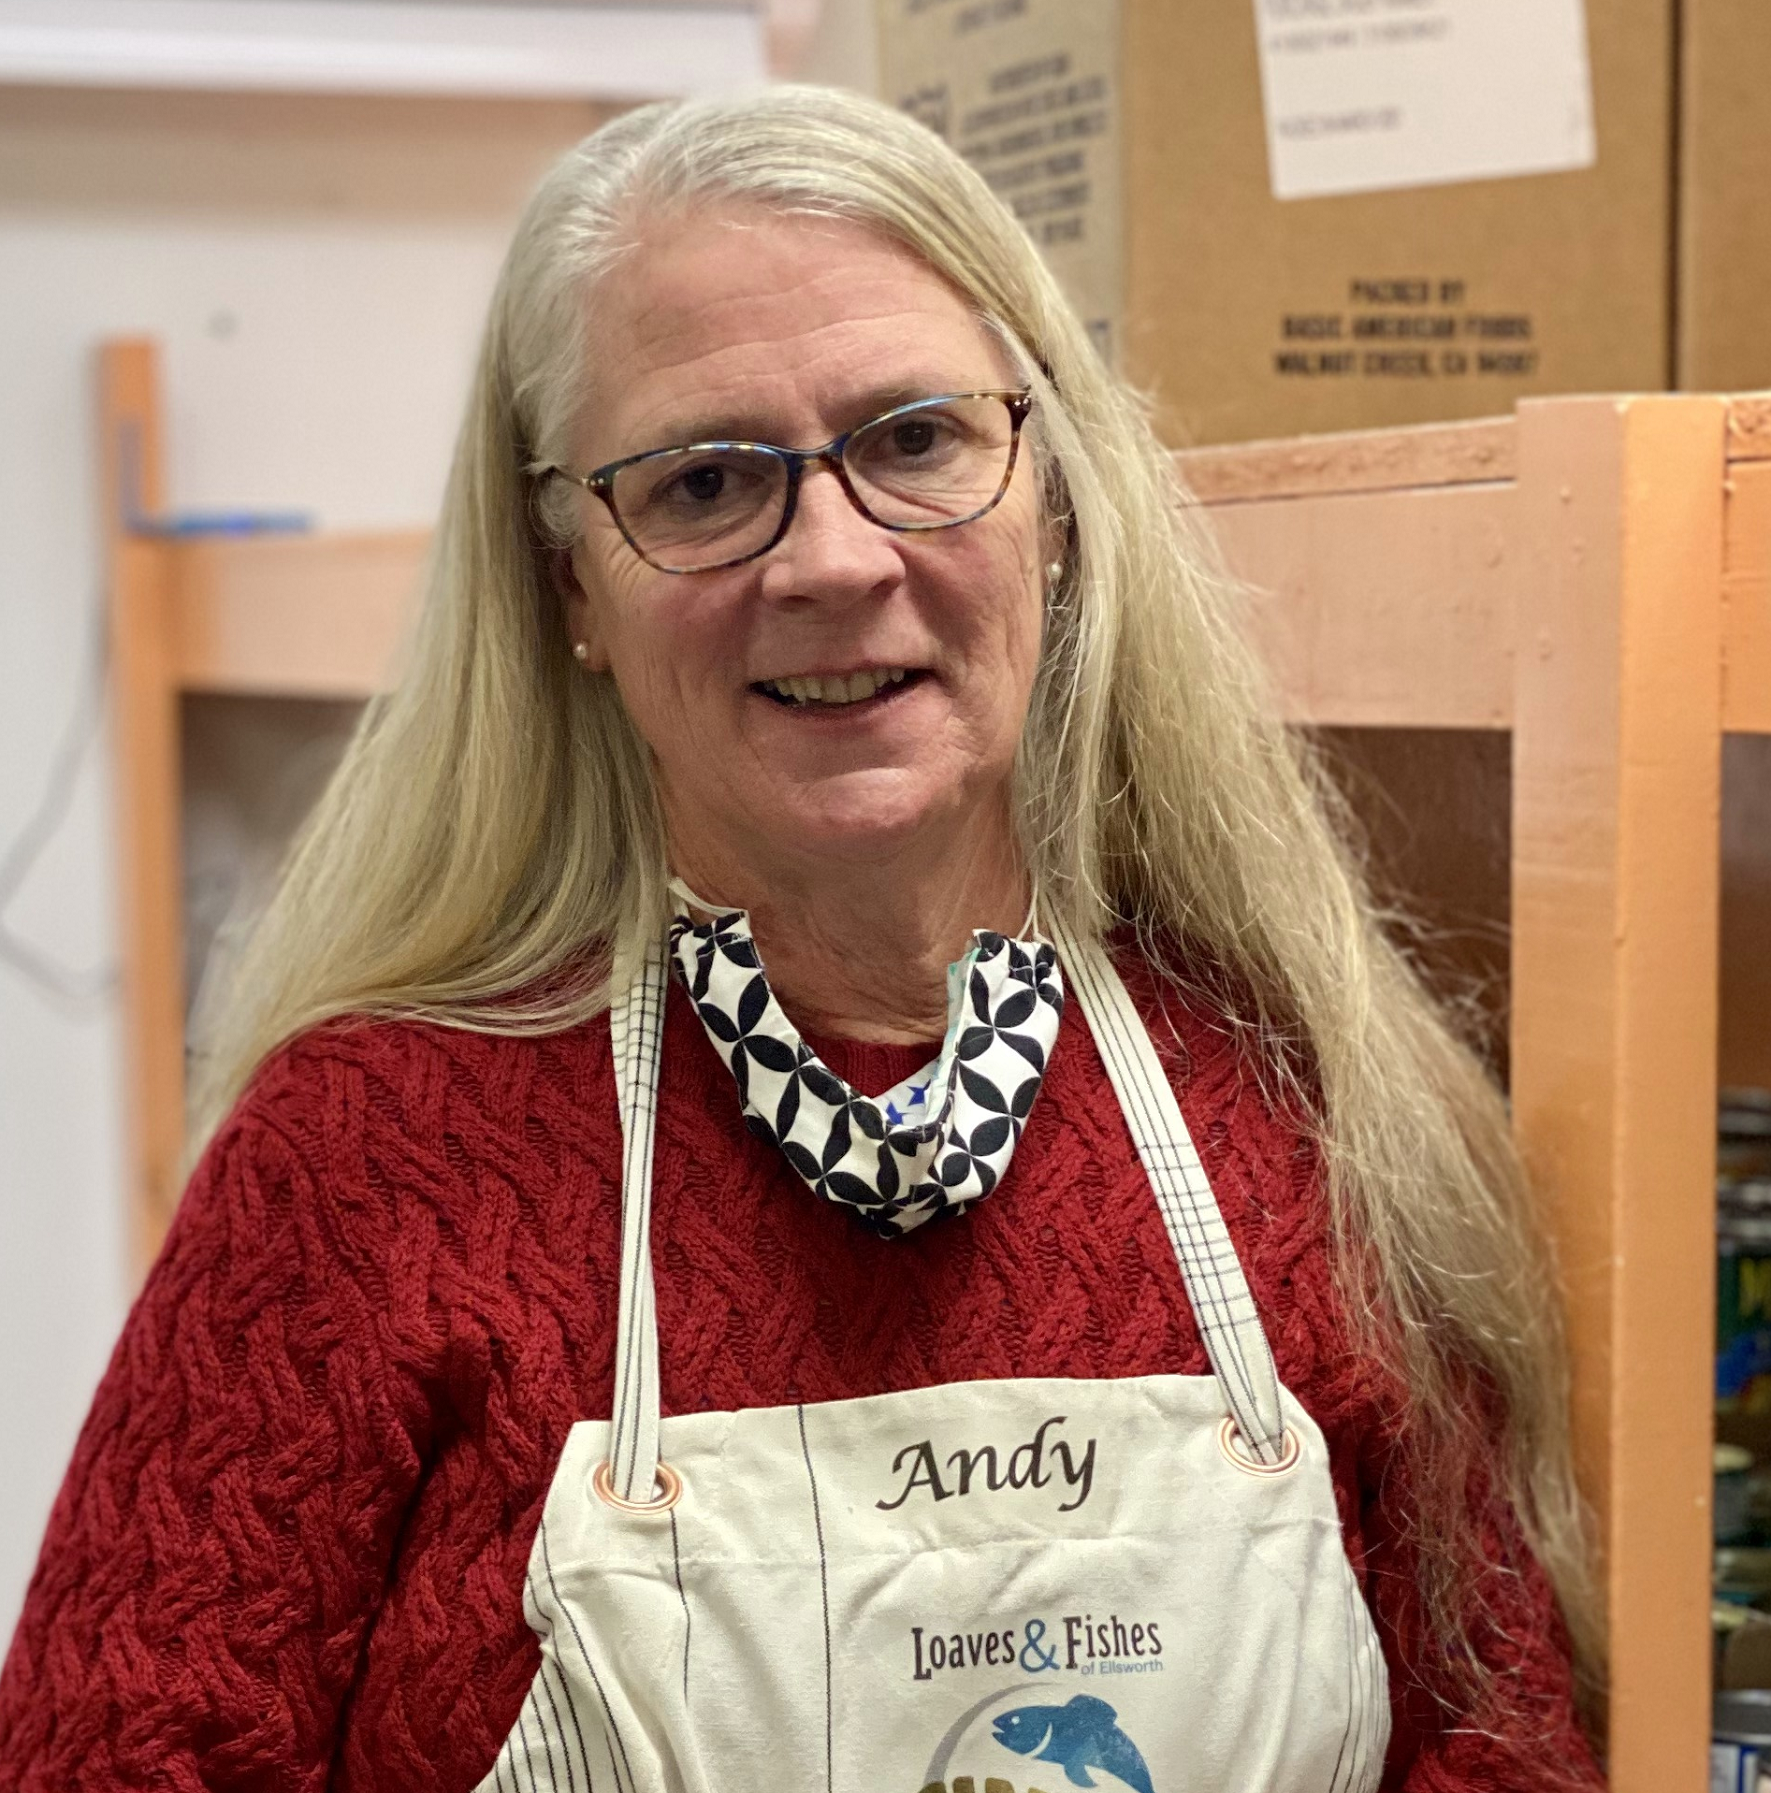 A food bank volunteer with an apron on smiles at the camera while standing in front of shelves of food and supplies for local families in need.